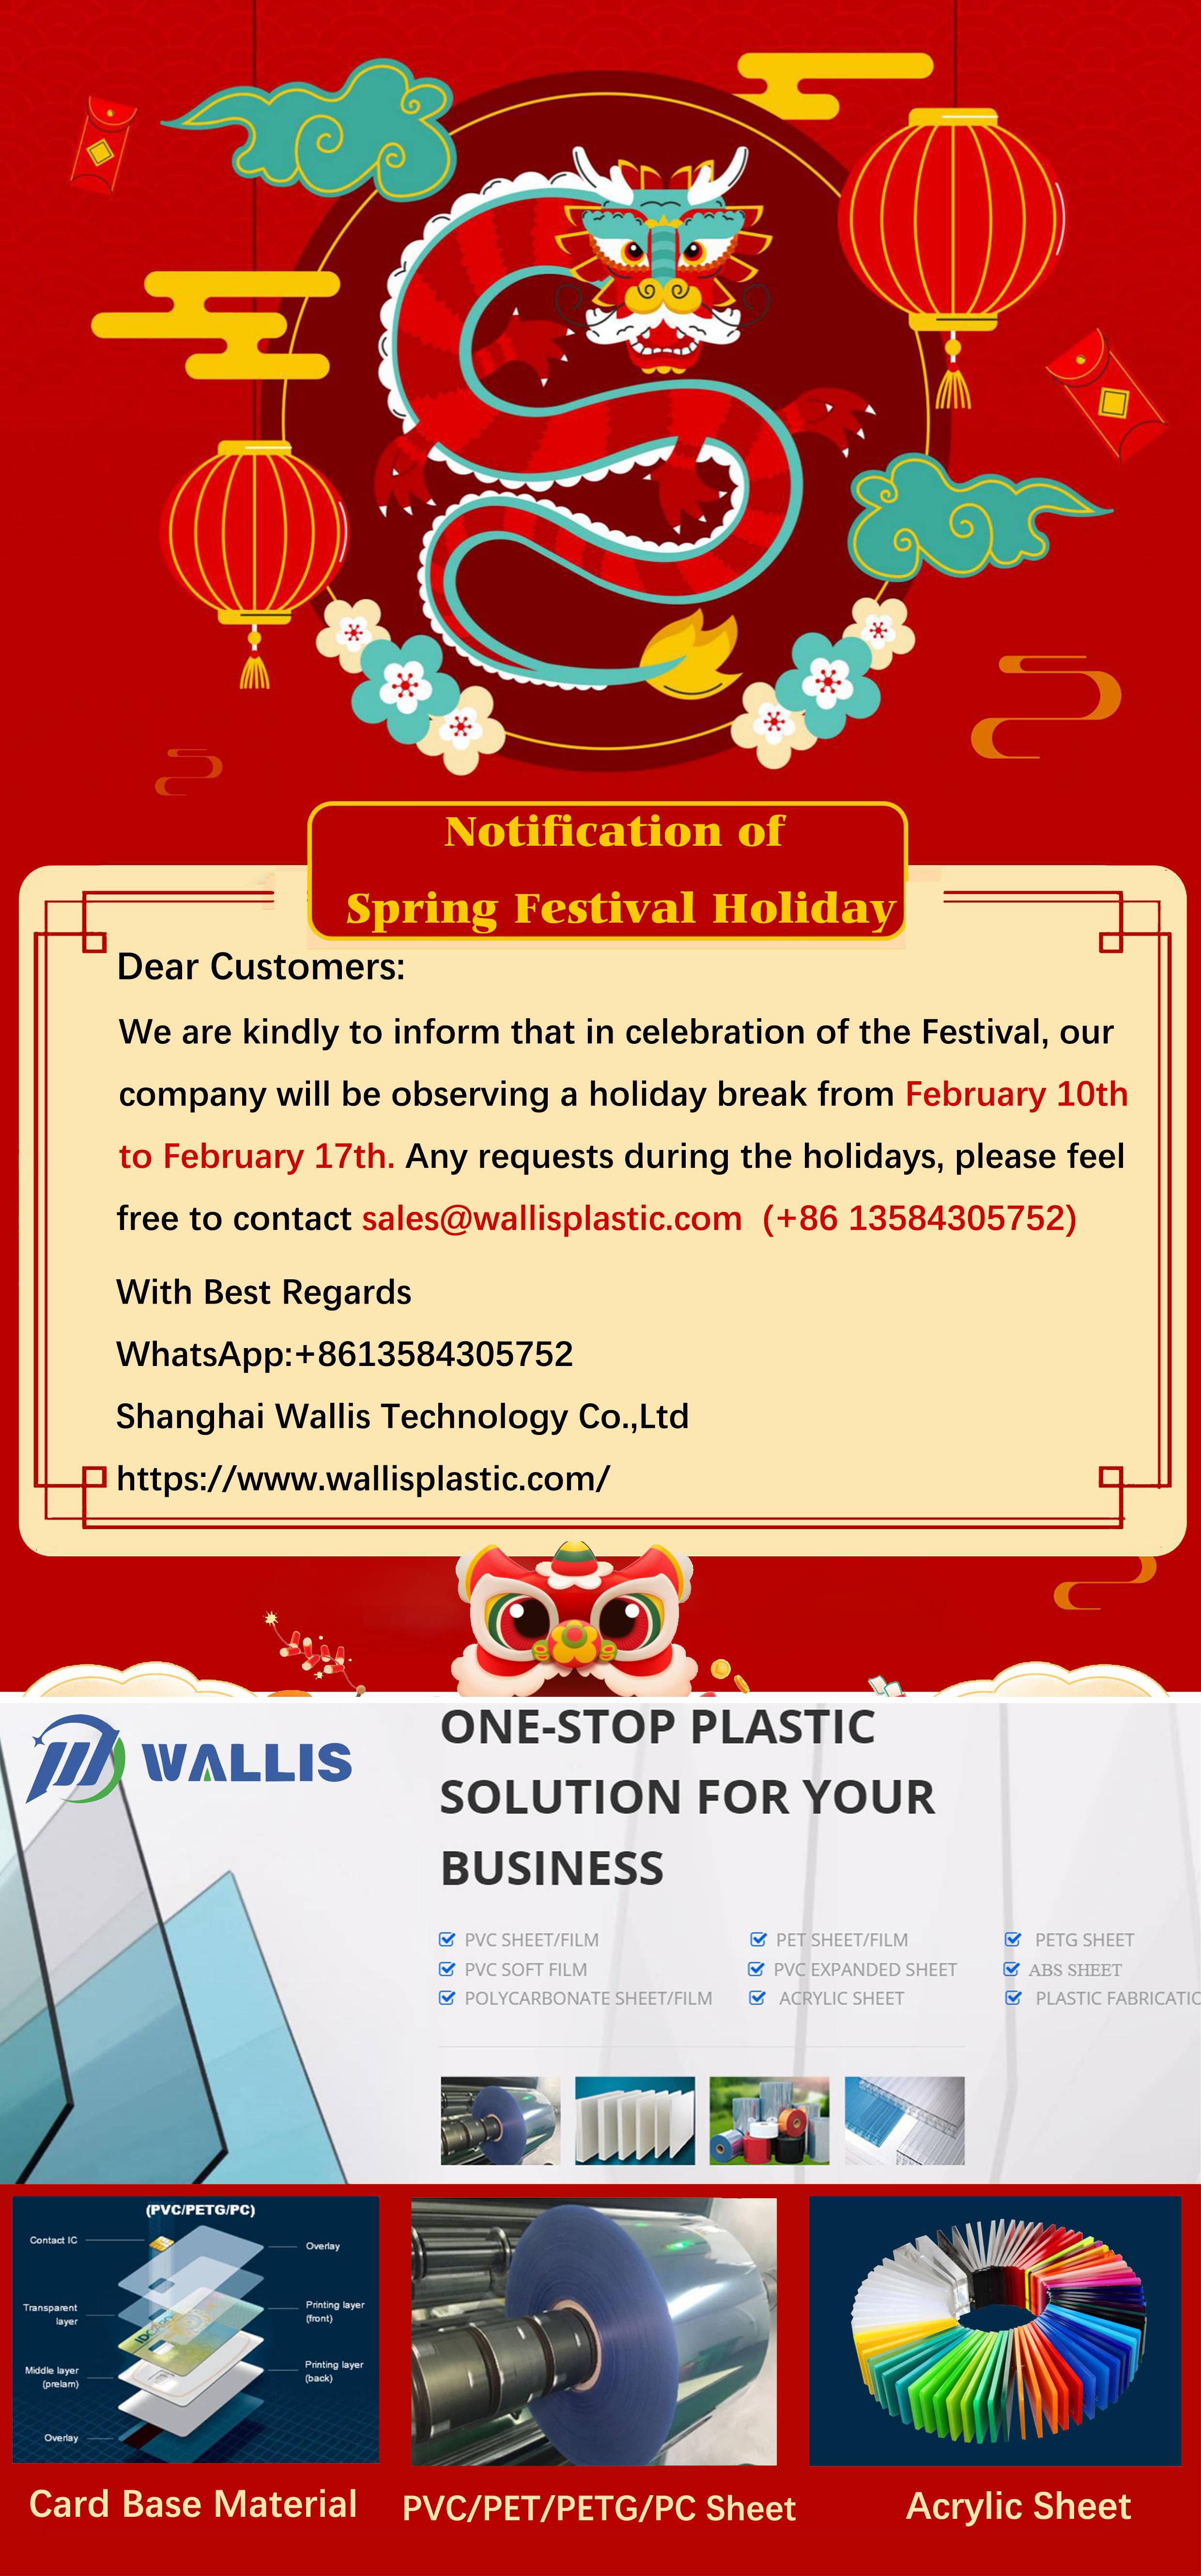 Shanghai Wallis Technology Ltd.: Celebrating the Spring Festival and Holiday Schedule